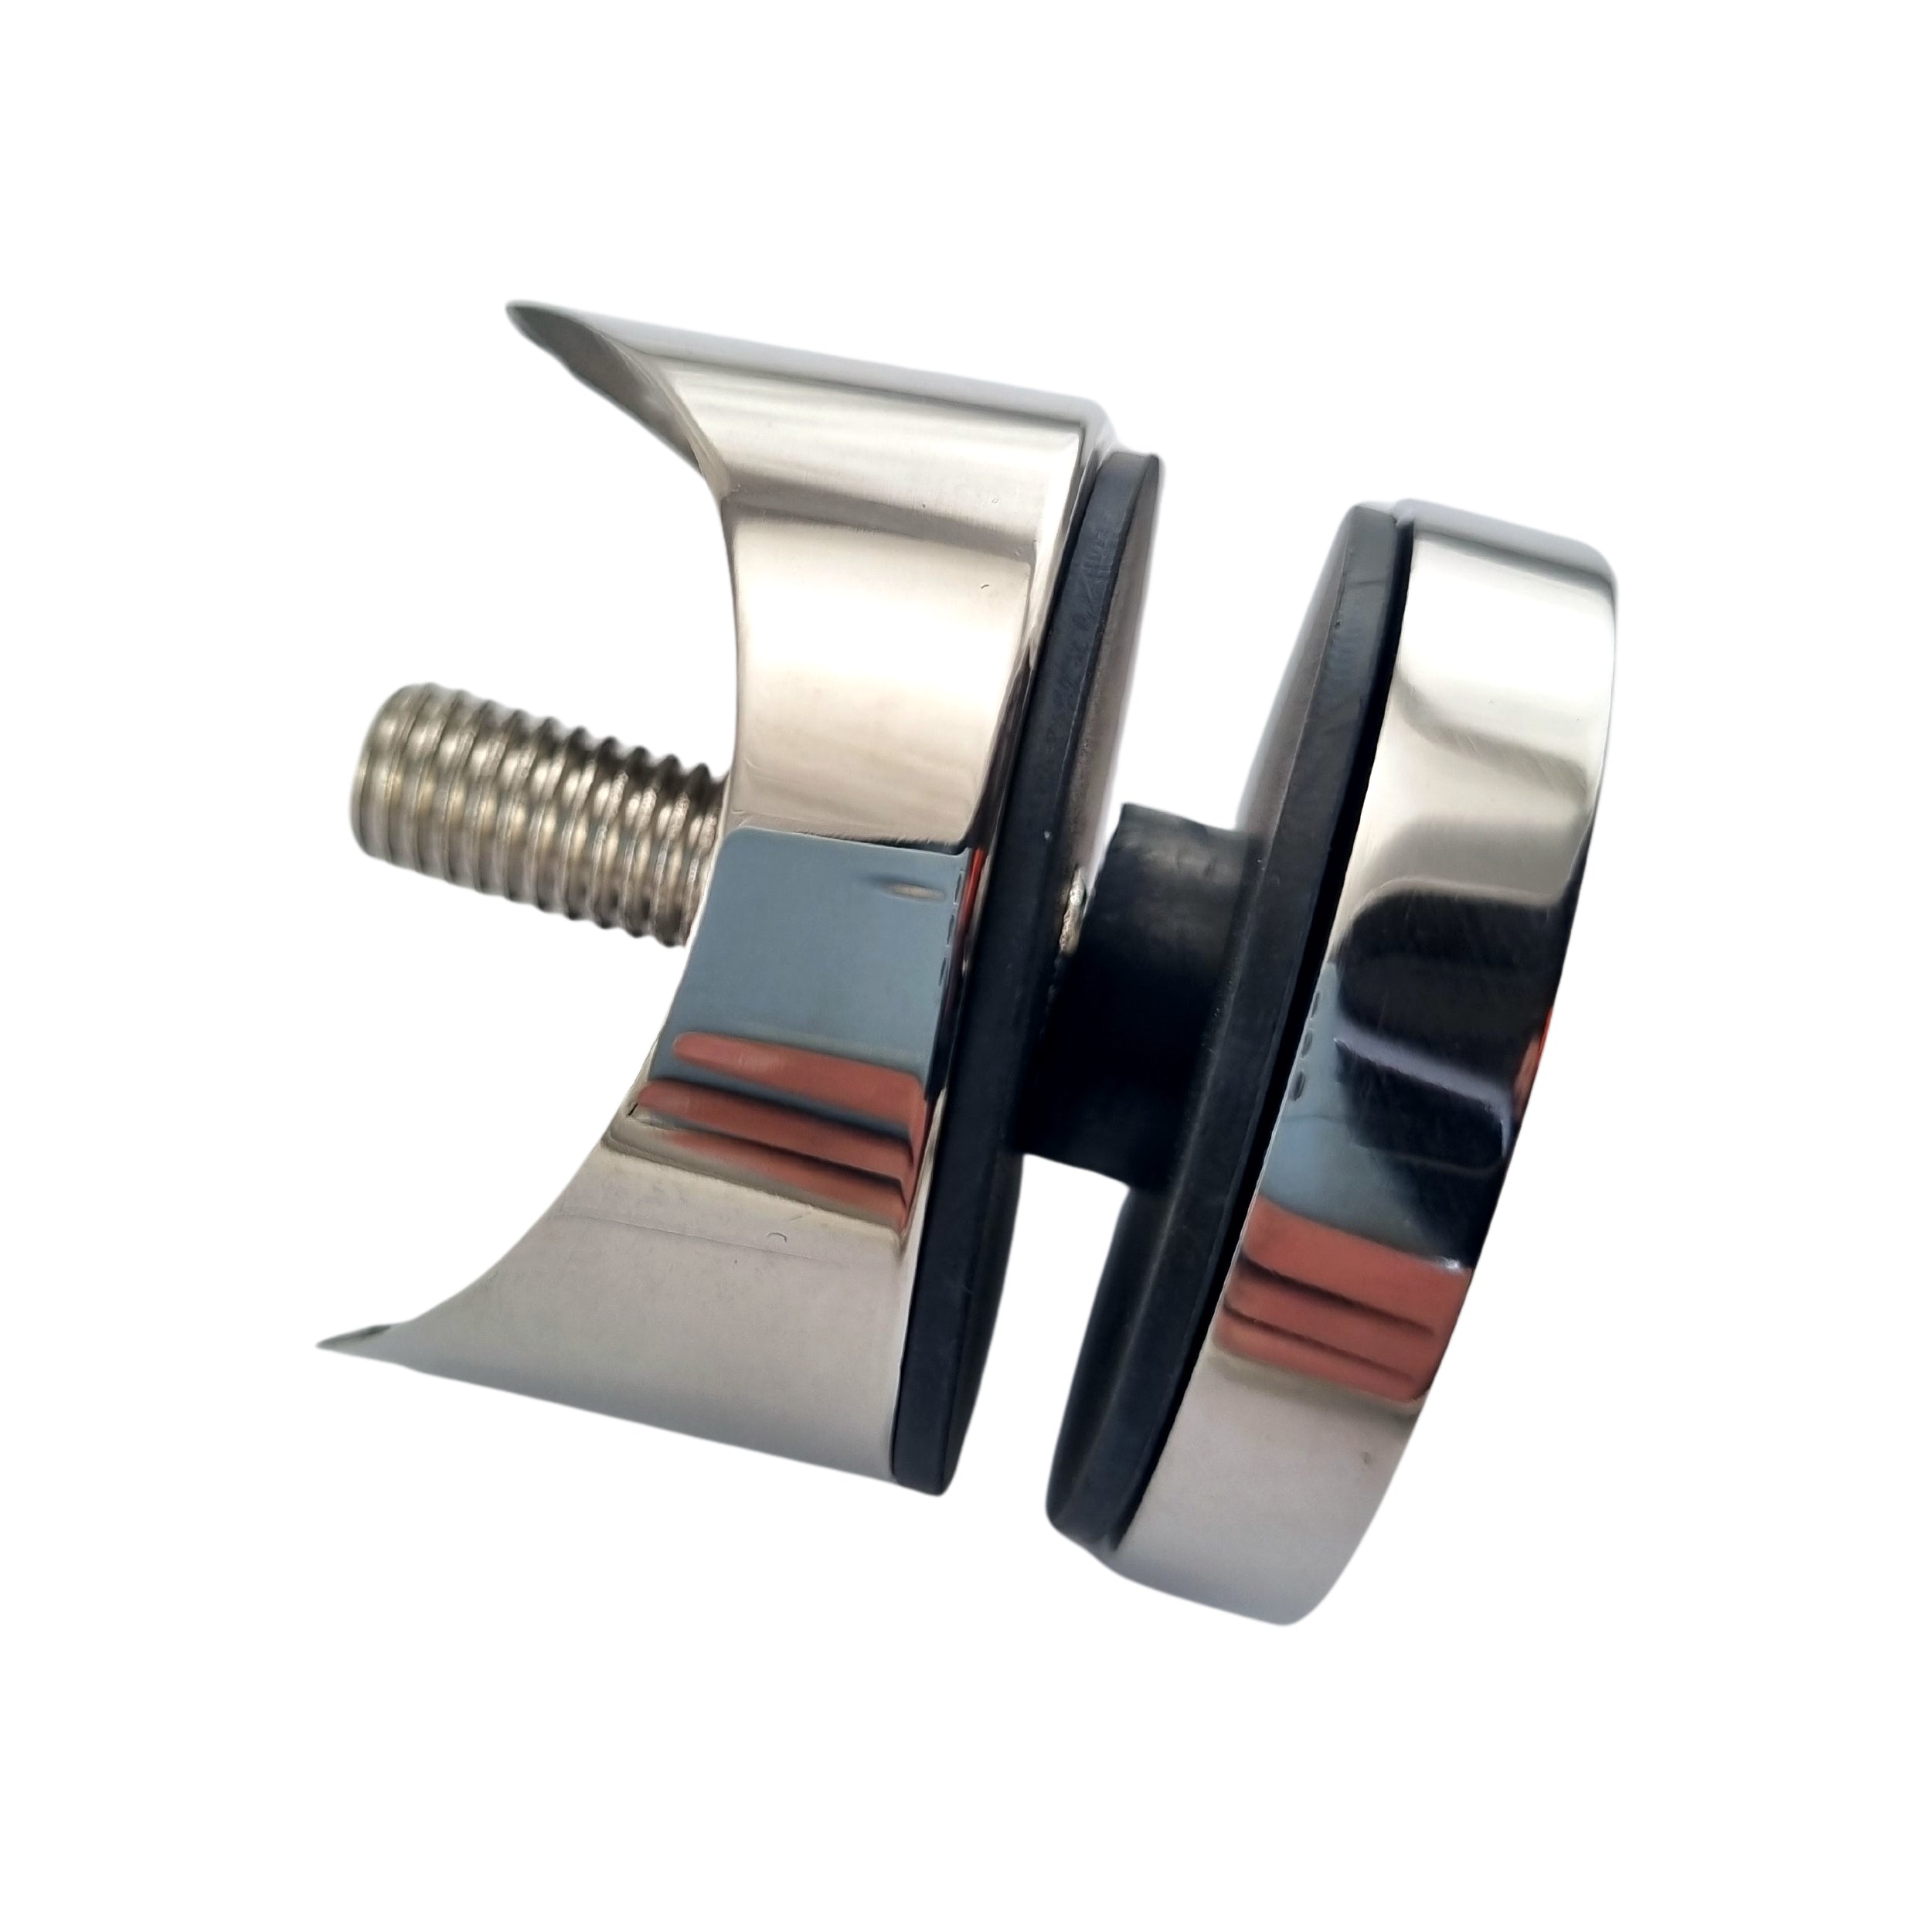 Stainless Steel Curved Standoff Pin. For glass balustrading or glass pool fencing. Australia wide shipping. Shop: chain.com.au